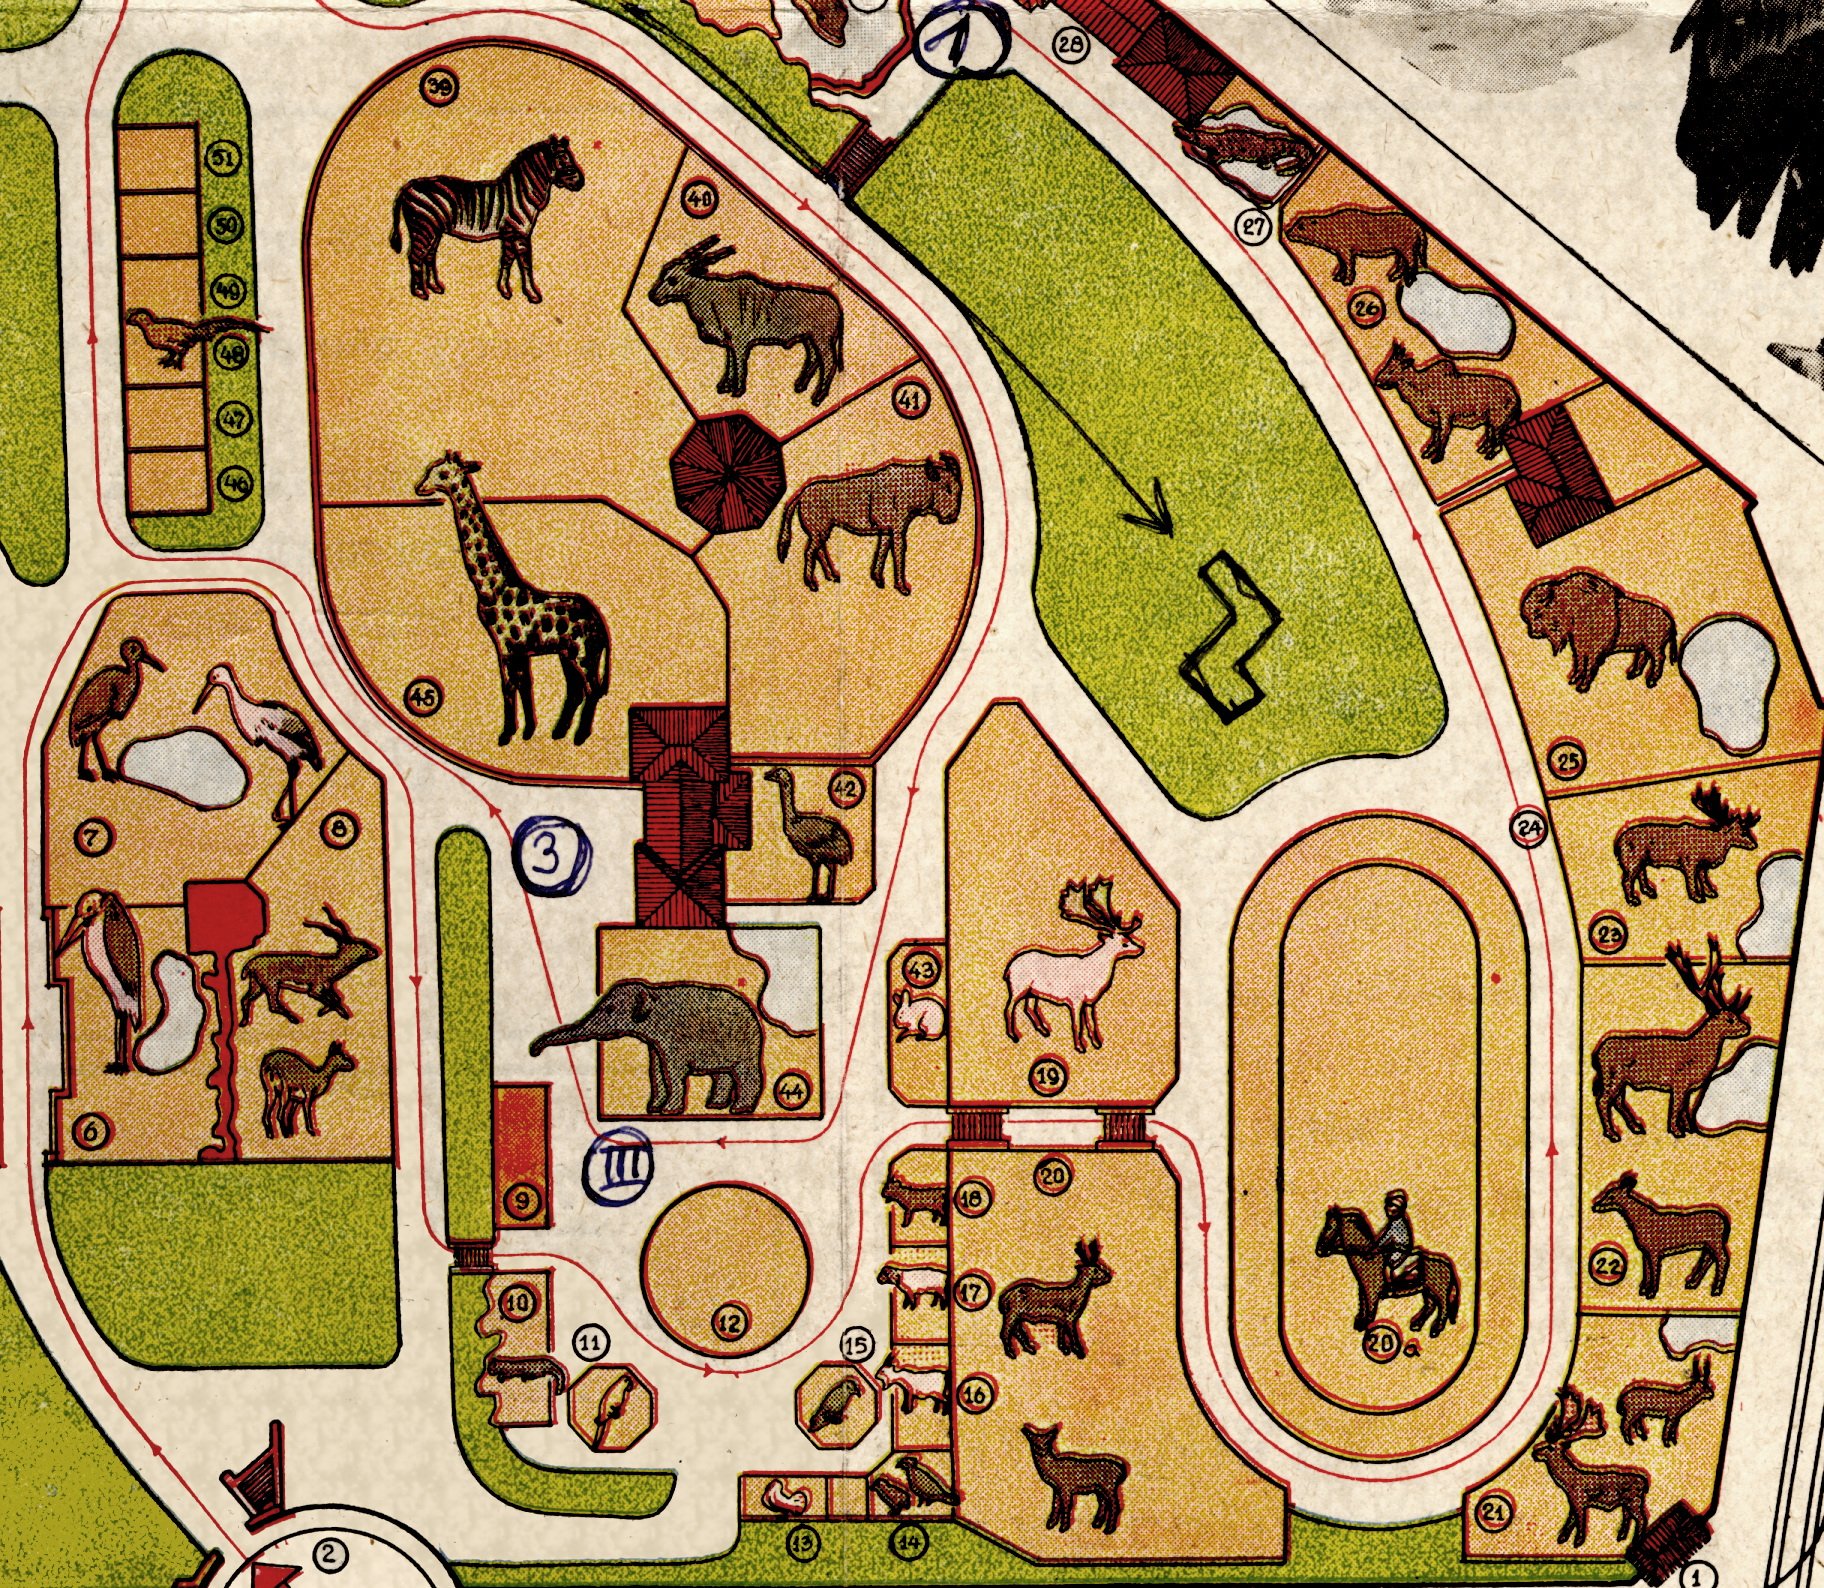 Detailed view of the part with designated areas for some of the first Zoo inhabitants: marabou, storks, gemsboks, zebras, buffalos, giraffes, elephants, otters and parrots, as well as a children's hippodrome.